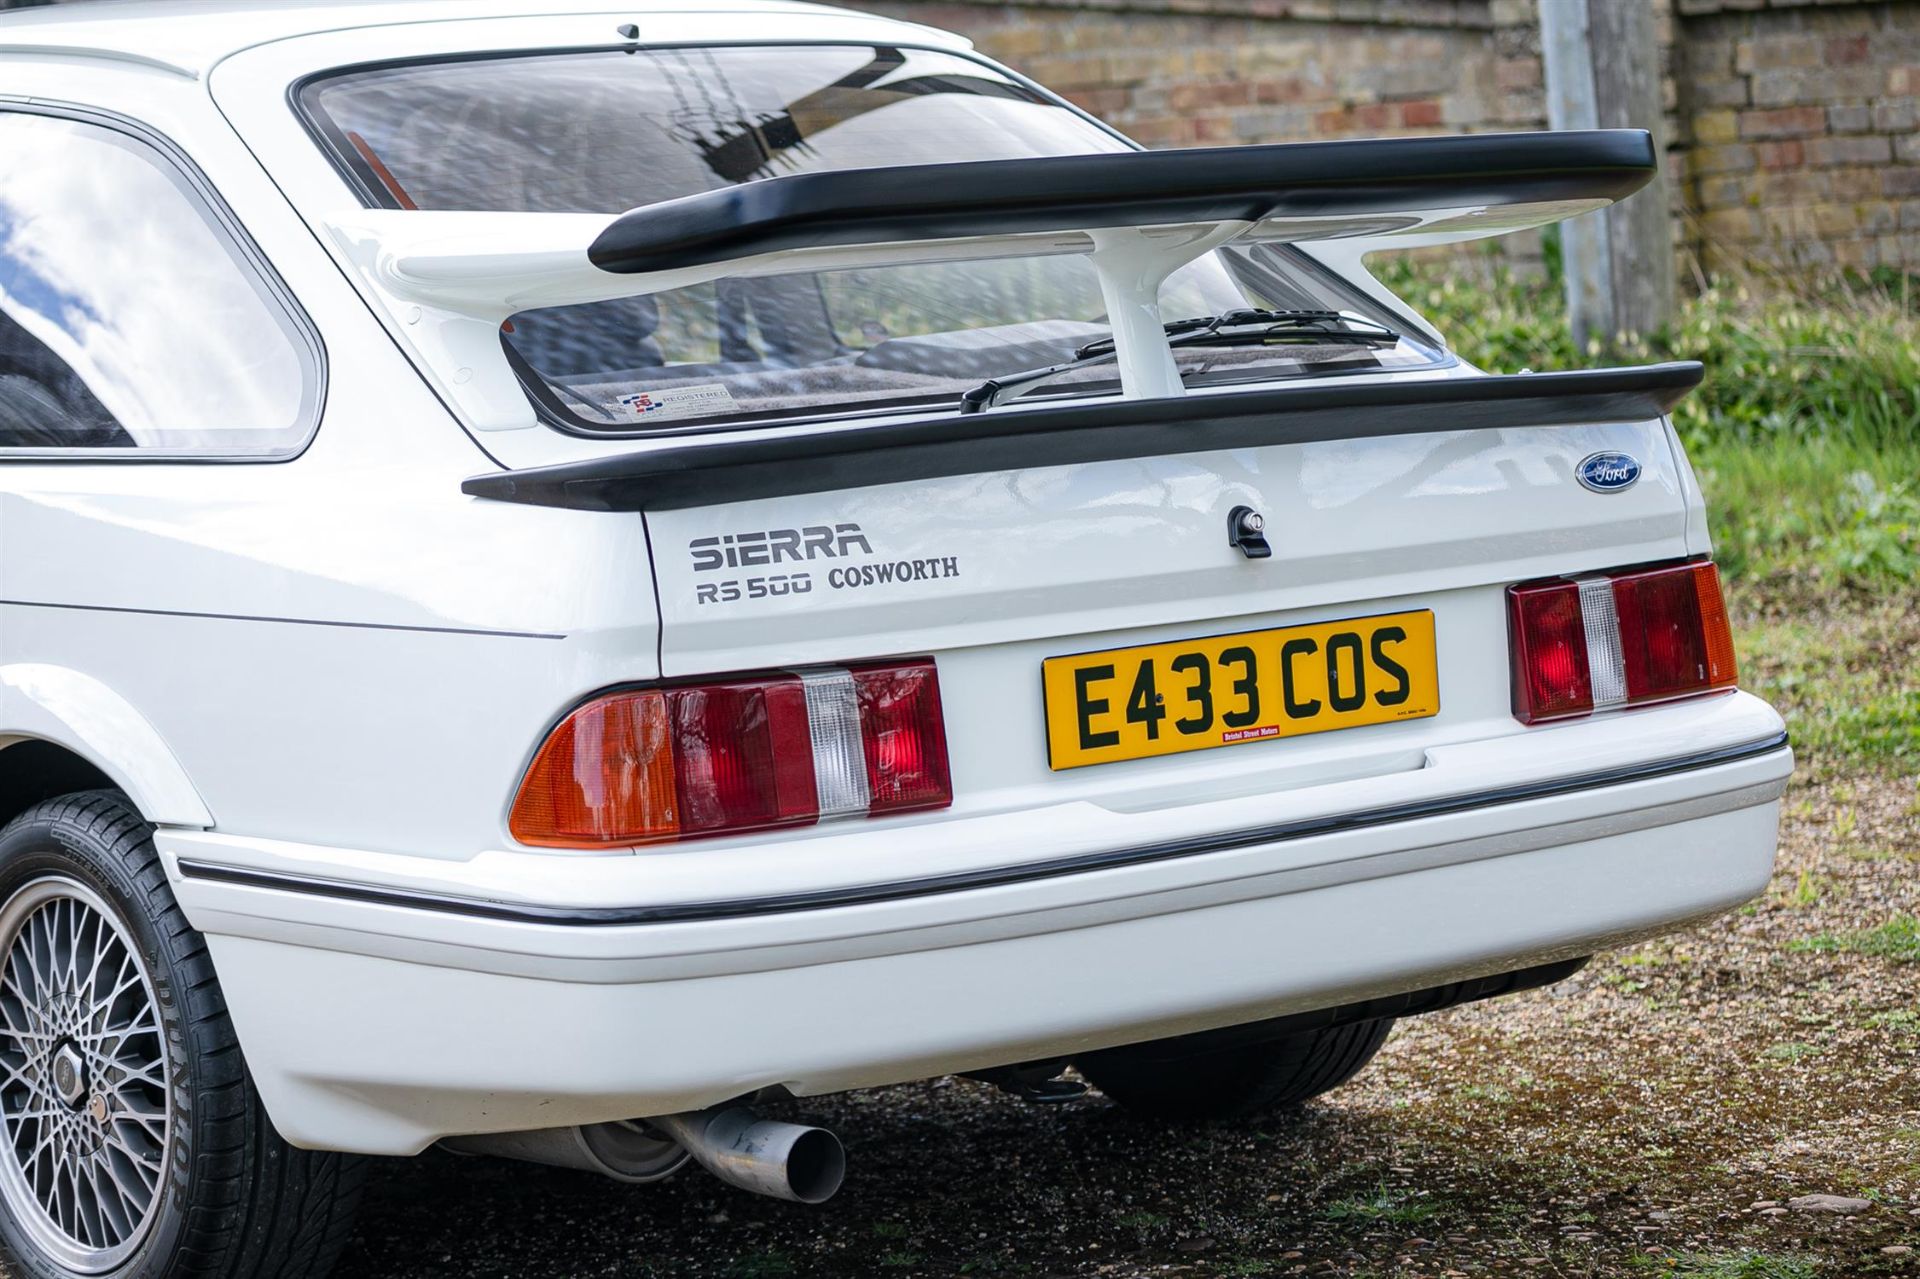 1987 Ford Sierra RS500 Cosworth #433 - 12,805 Miles - Image 9 of 10